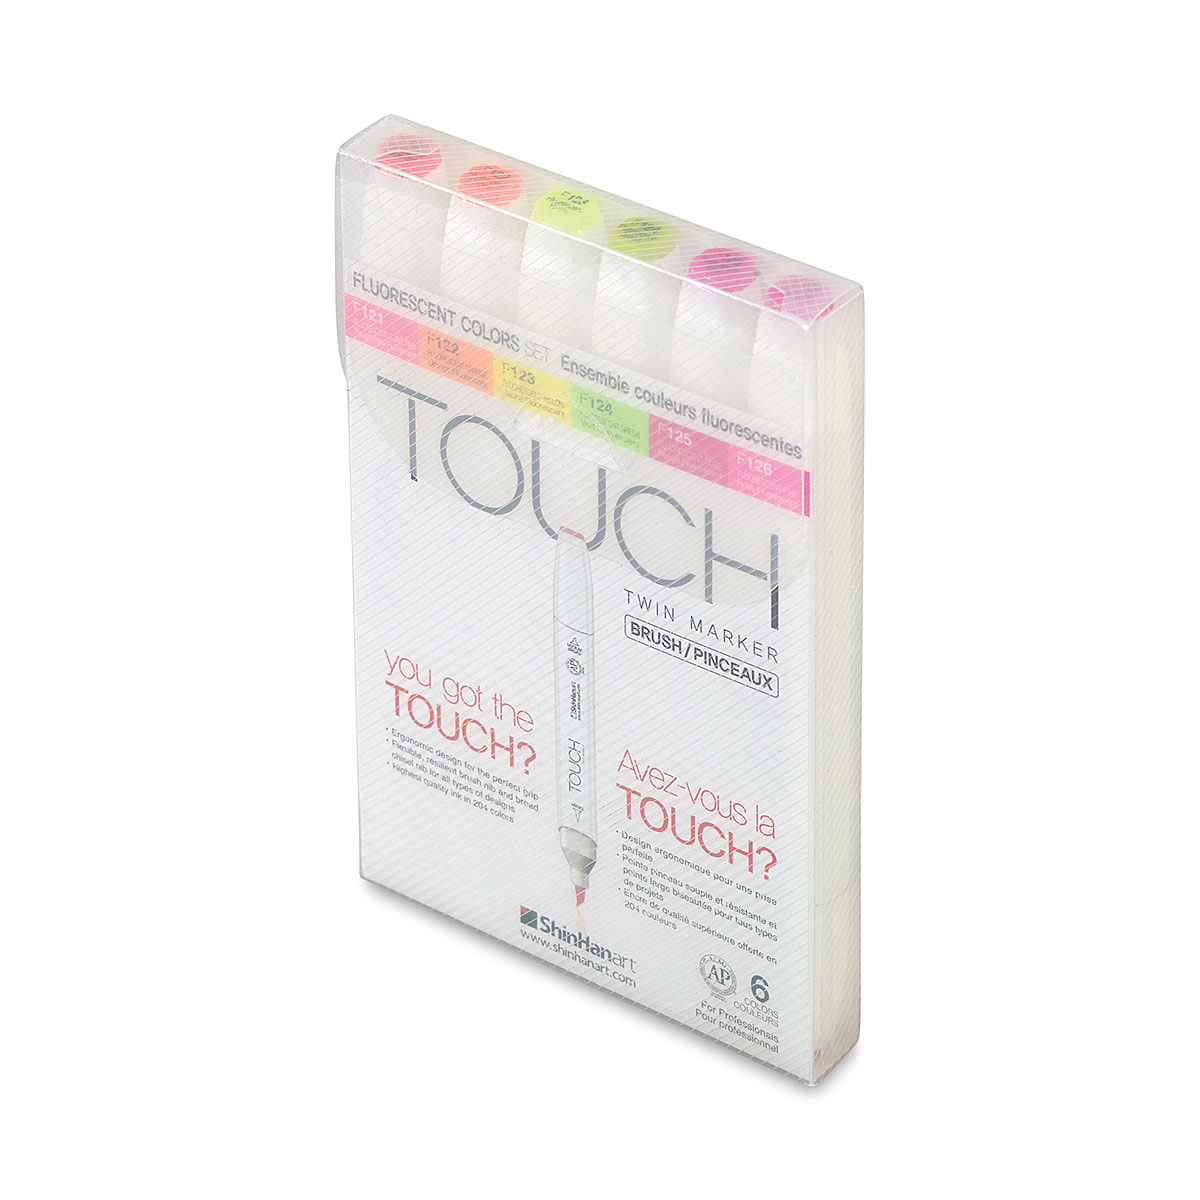 Shinhan Touch Twin Markers for Landscapes - The Fearless Brush